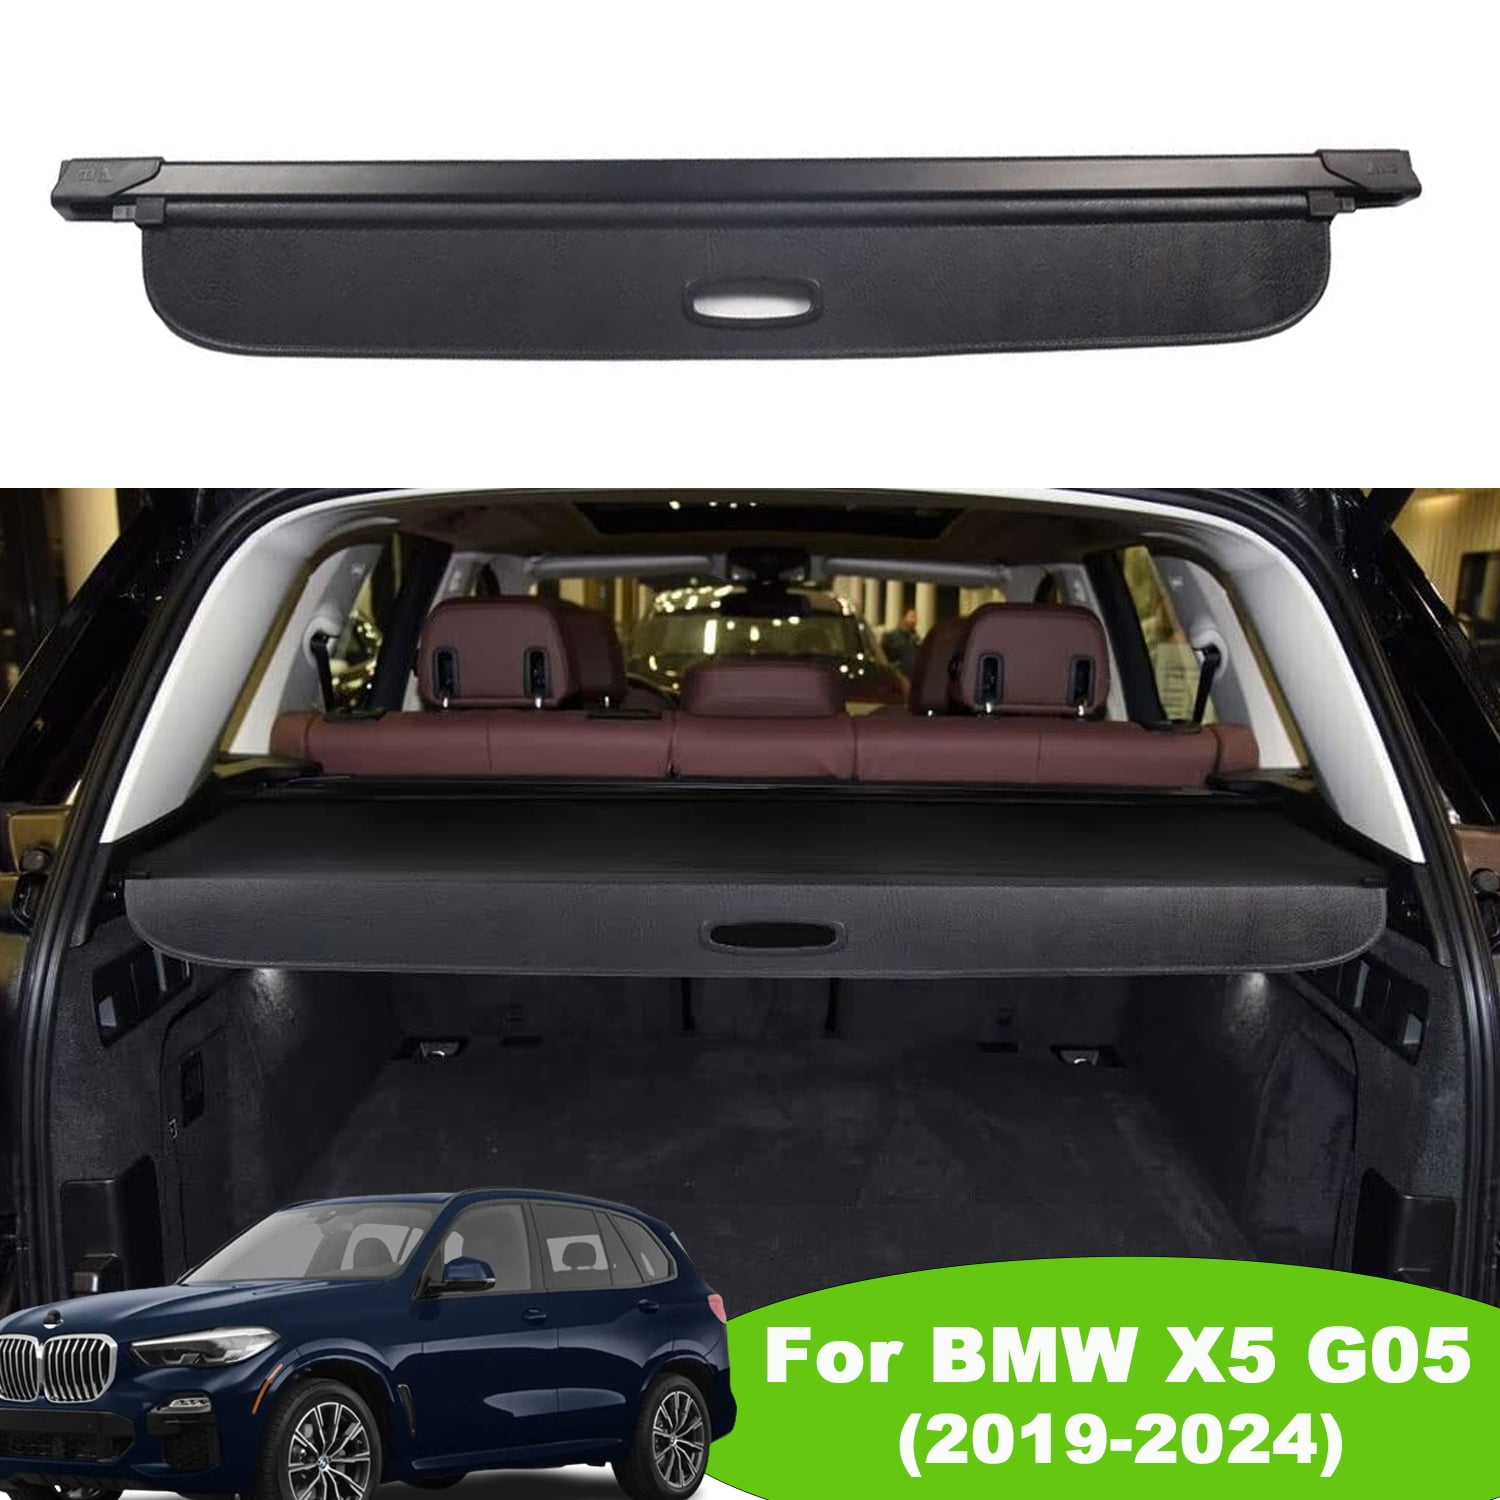 BMW X5 CAR COVERS - Cars Covers